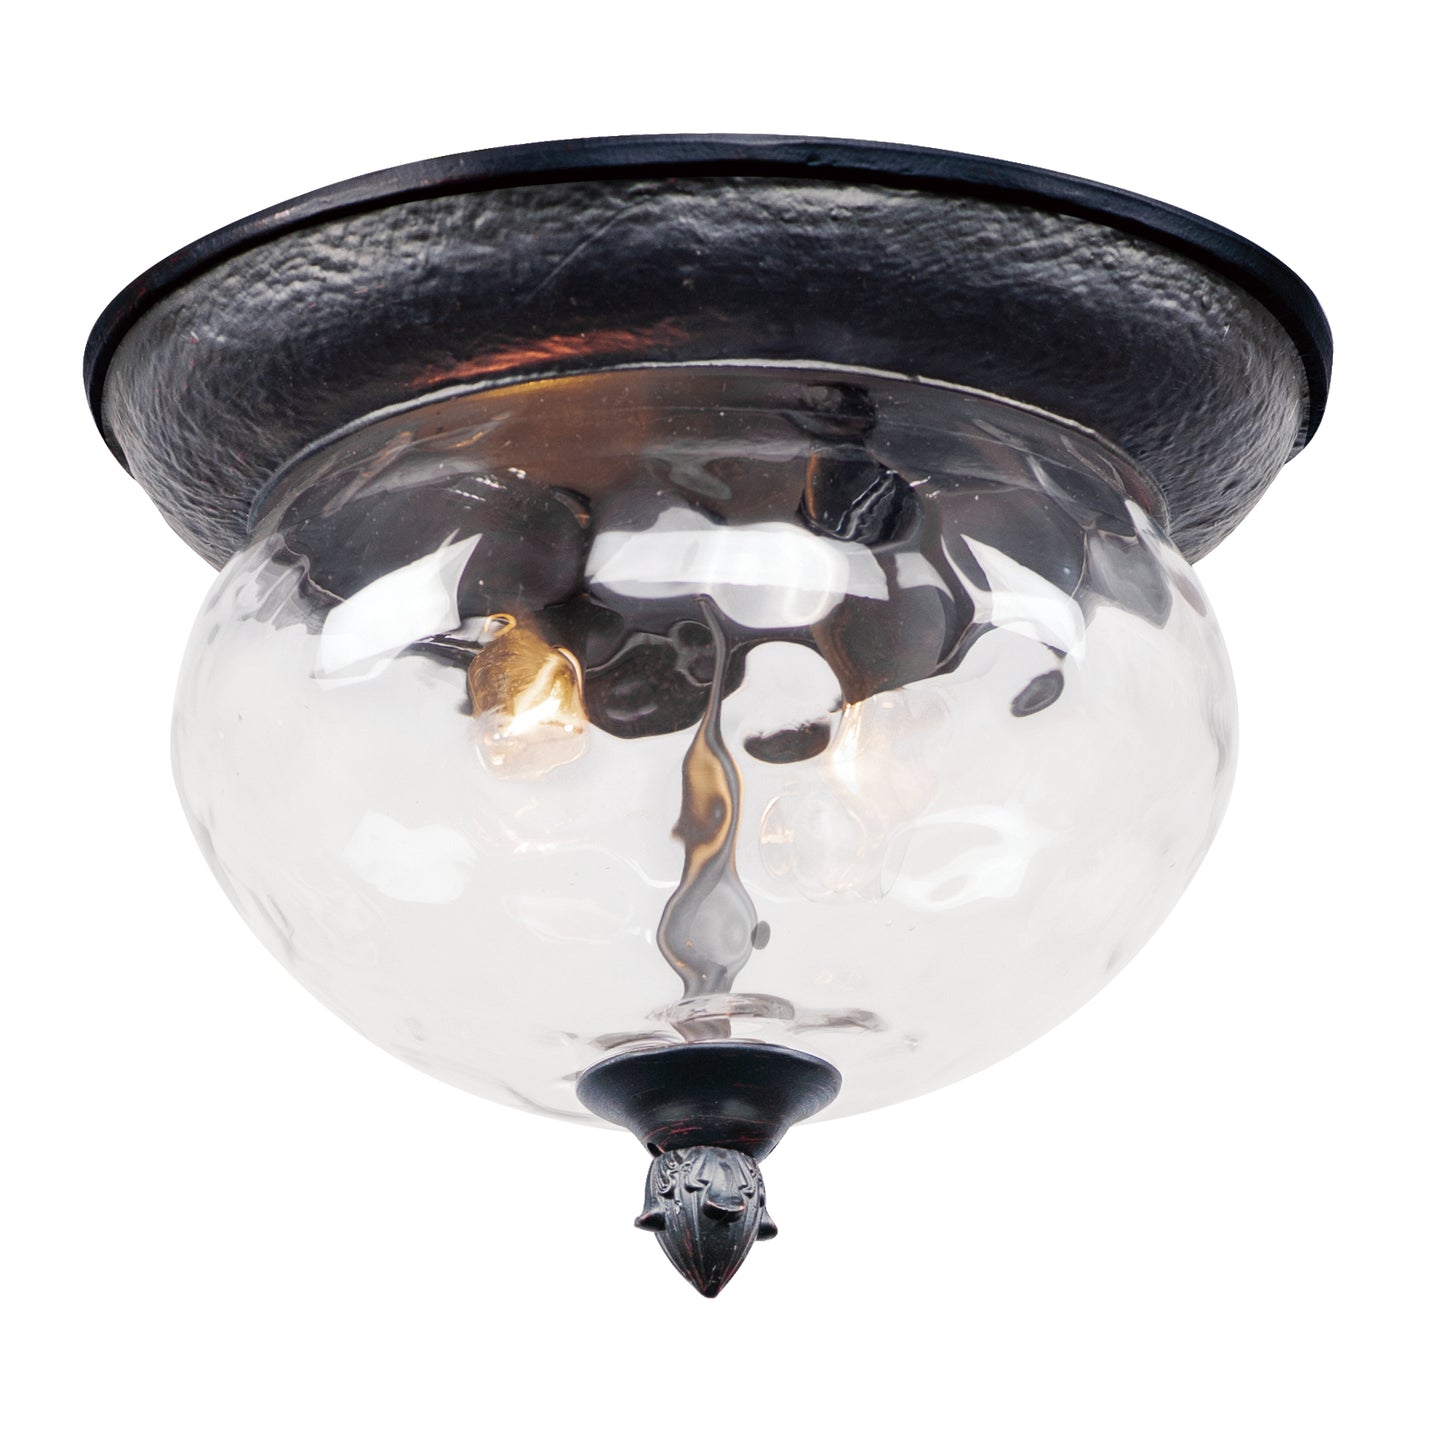 Maxim Carriage House DC 2-Light Outdoor Ceiling Mount